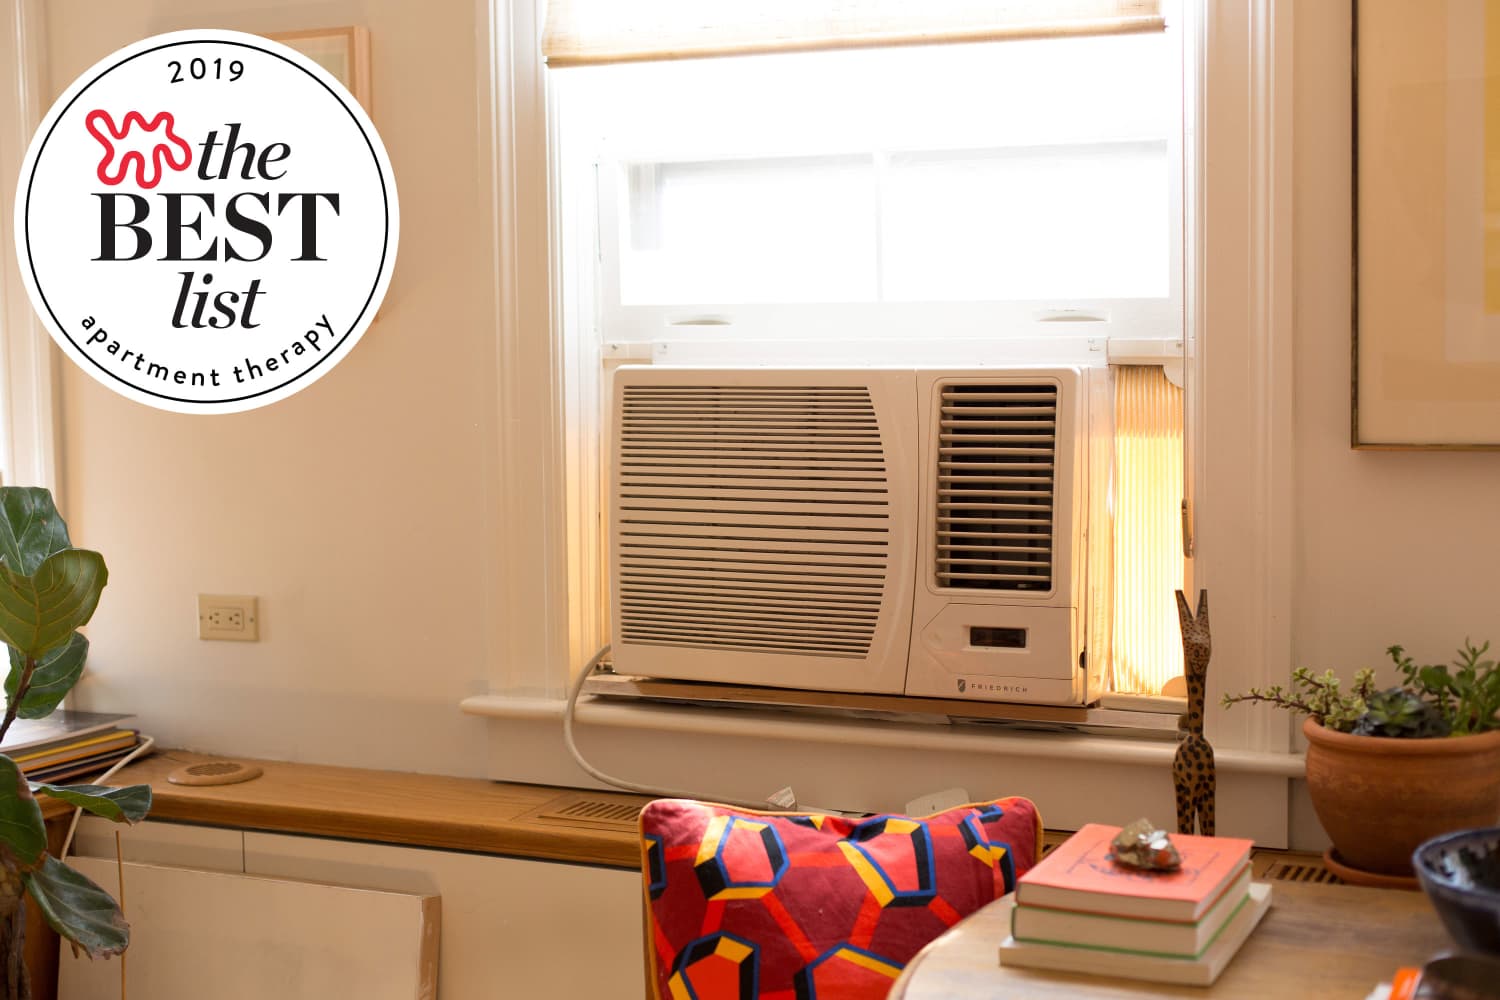 The Best Window Air Conditioner Units That Will Keep You Cool, Calm, and Collected